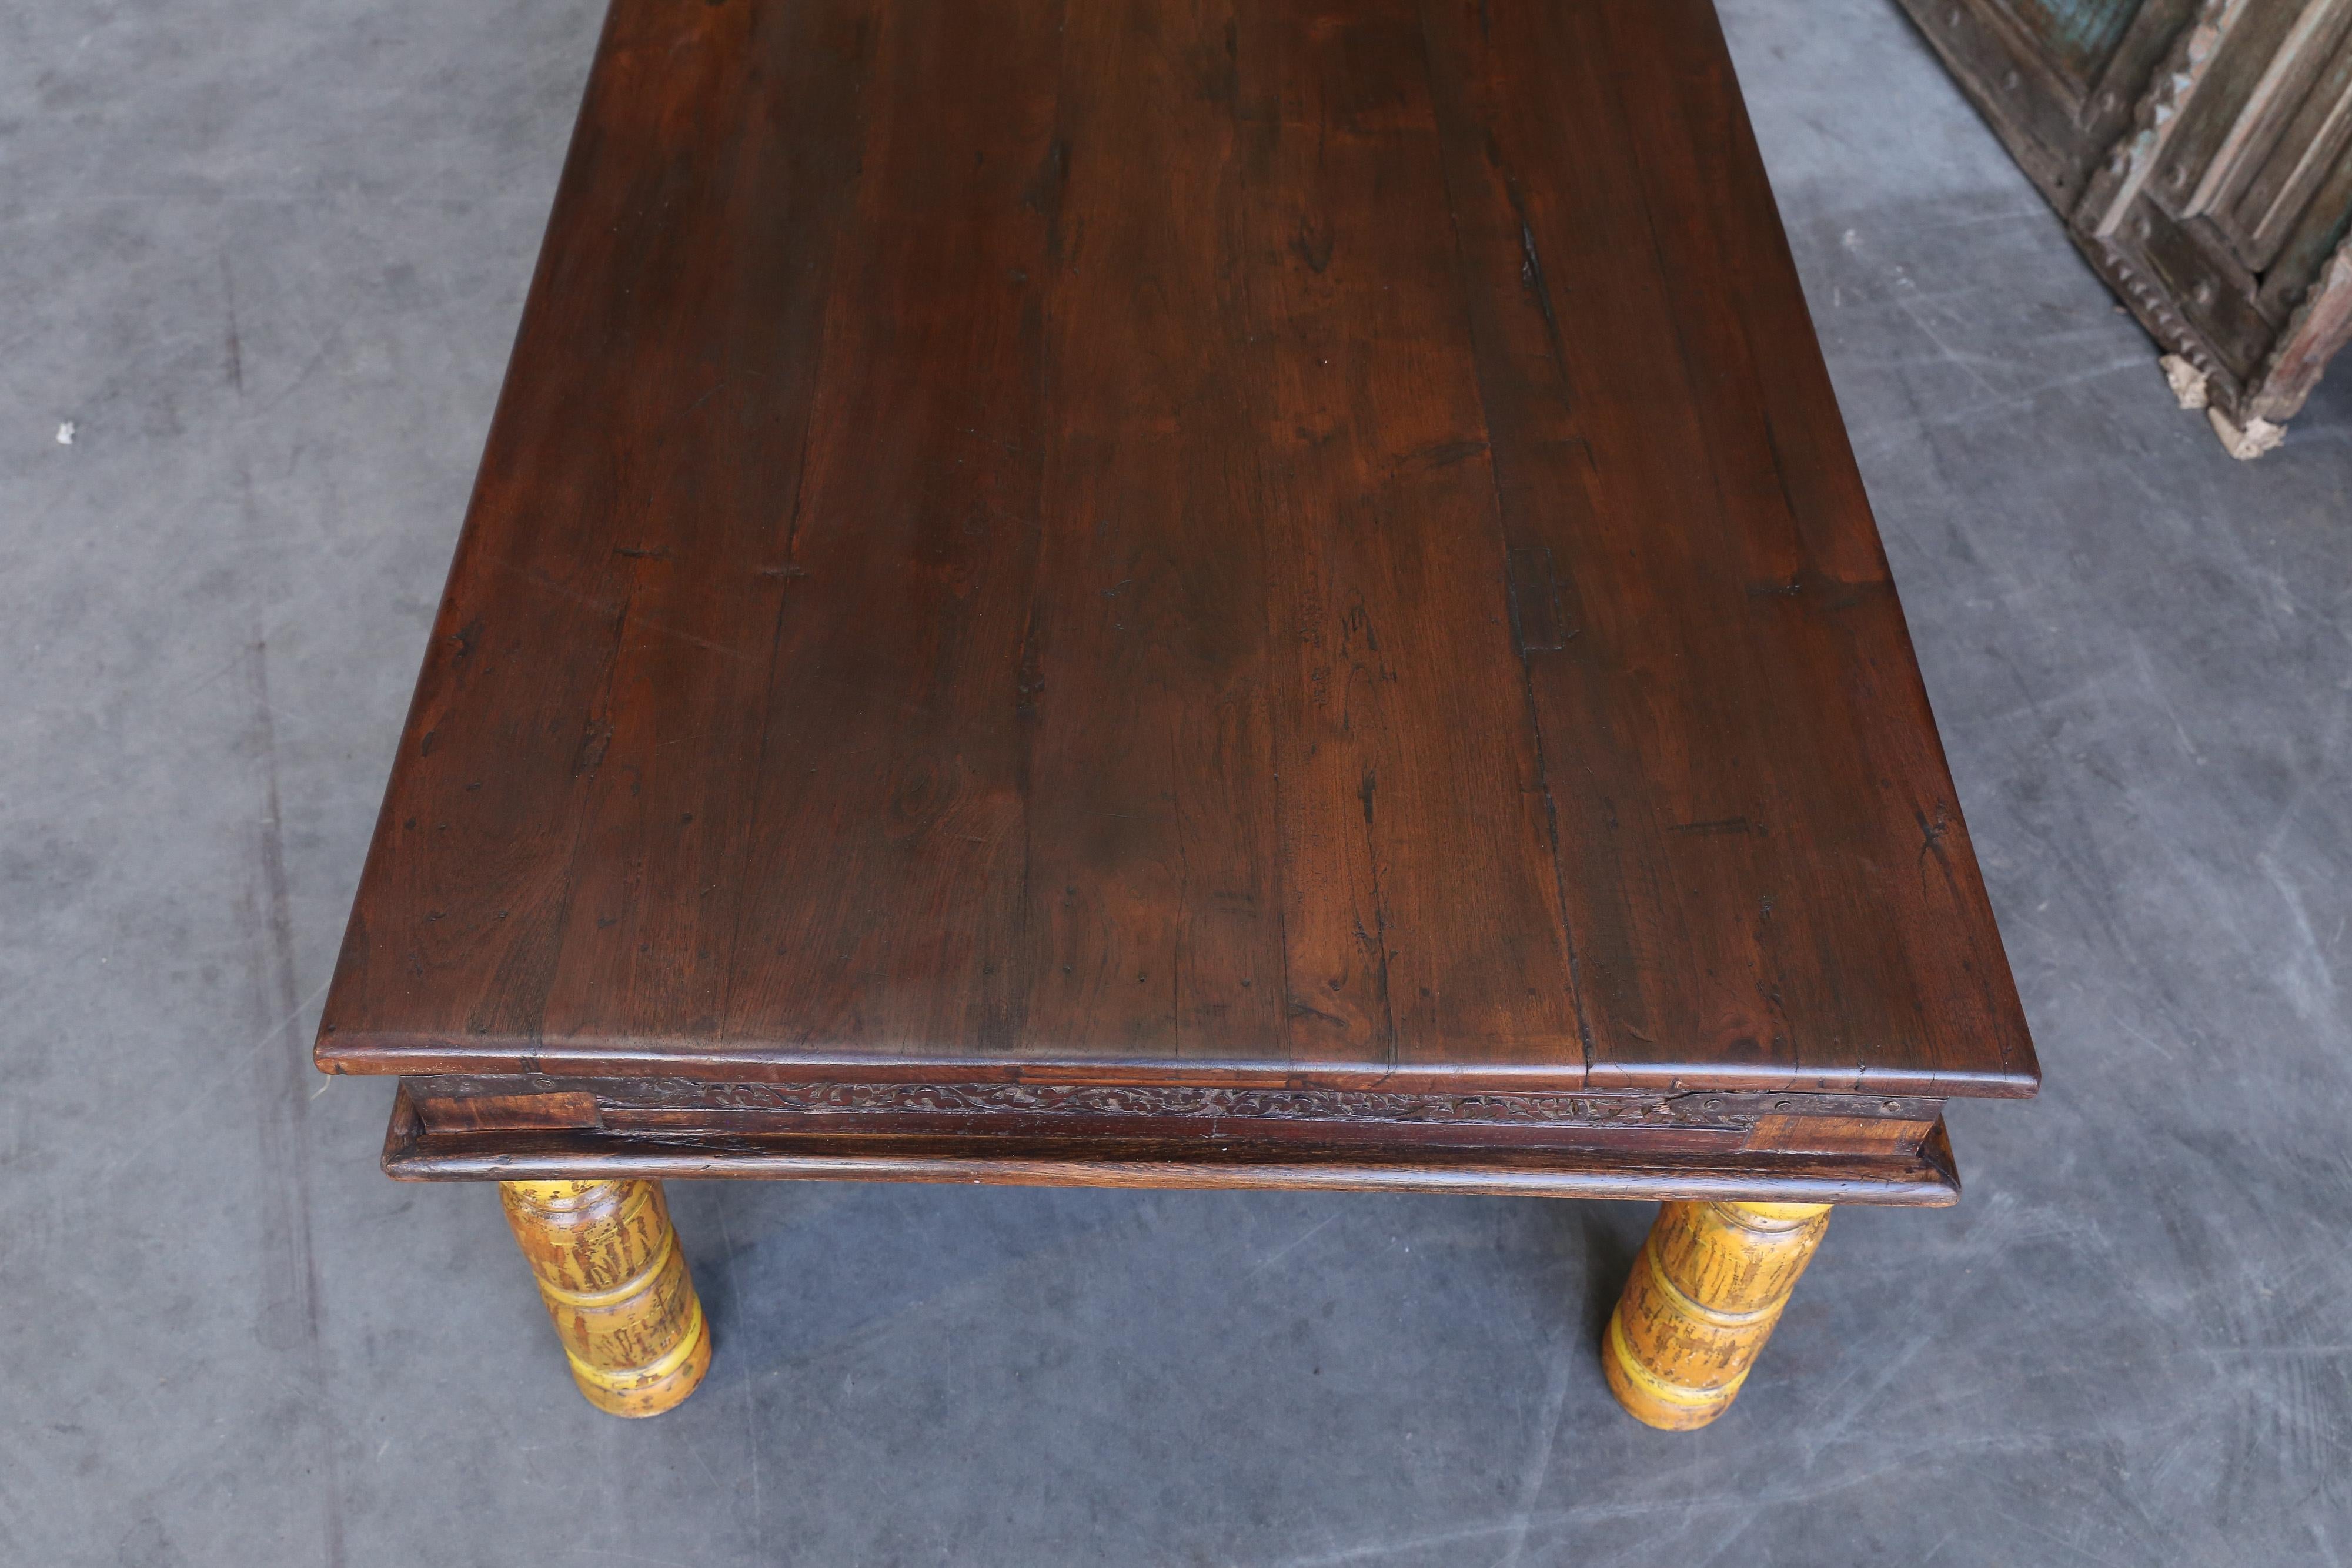 Late 19th Century 19th Century Idealistic Solid Teak Wood Coffee Table from a Tea Plantation For Sale